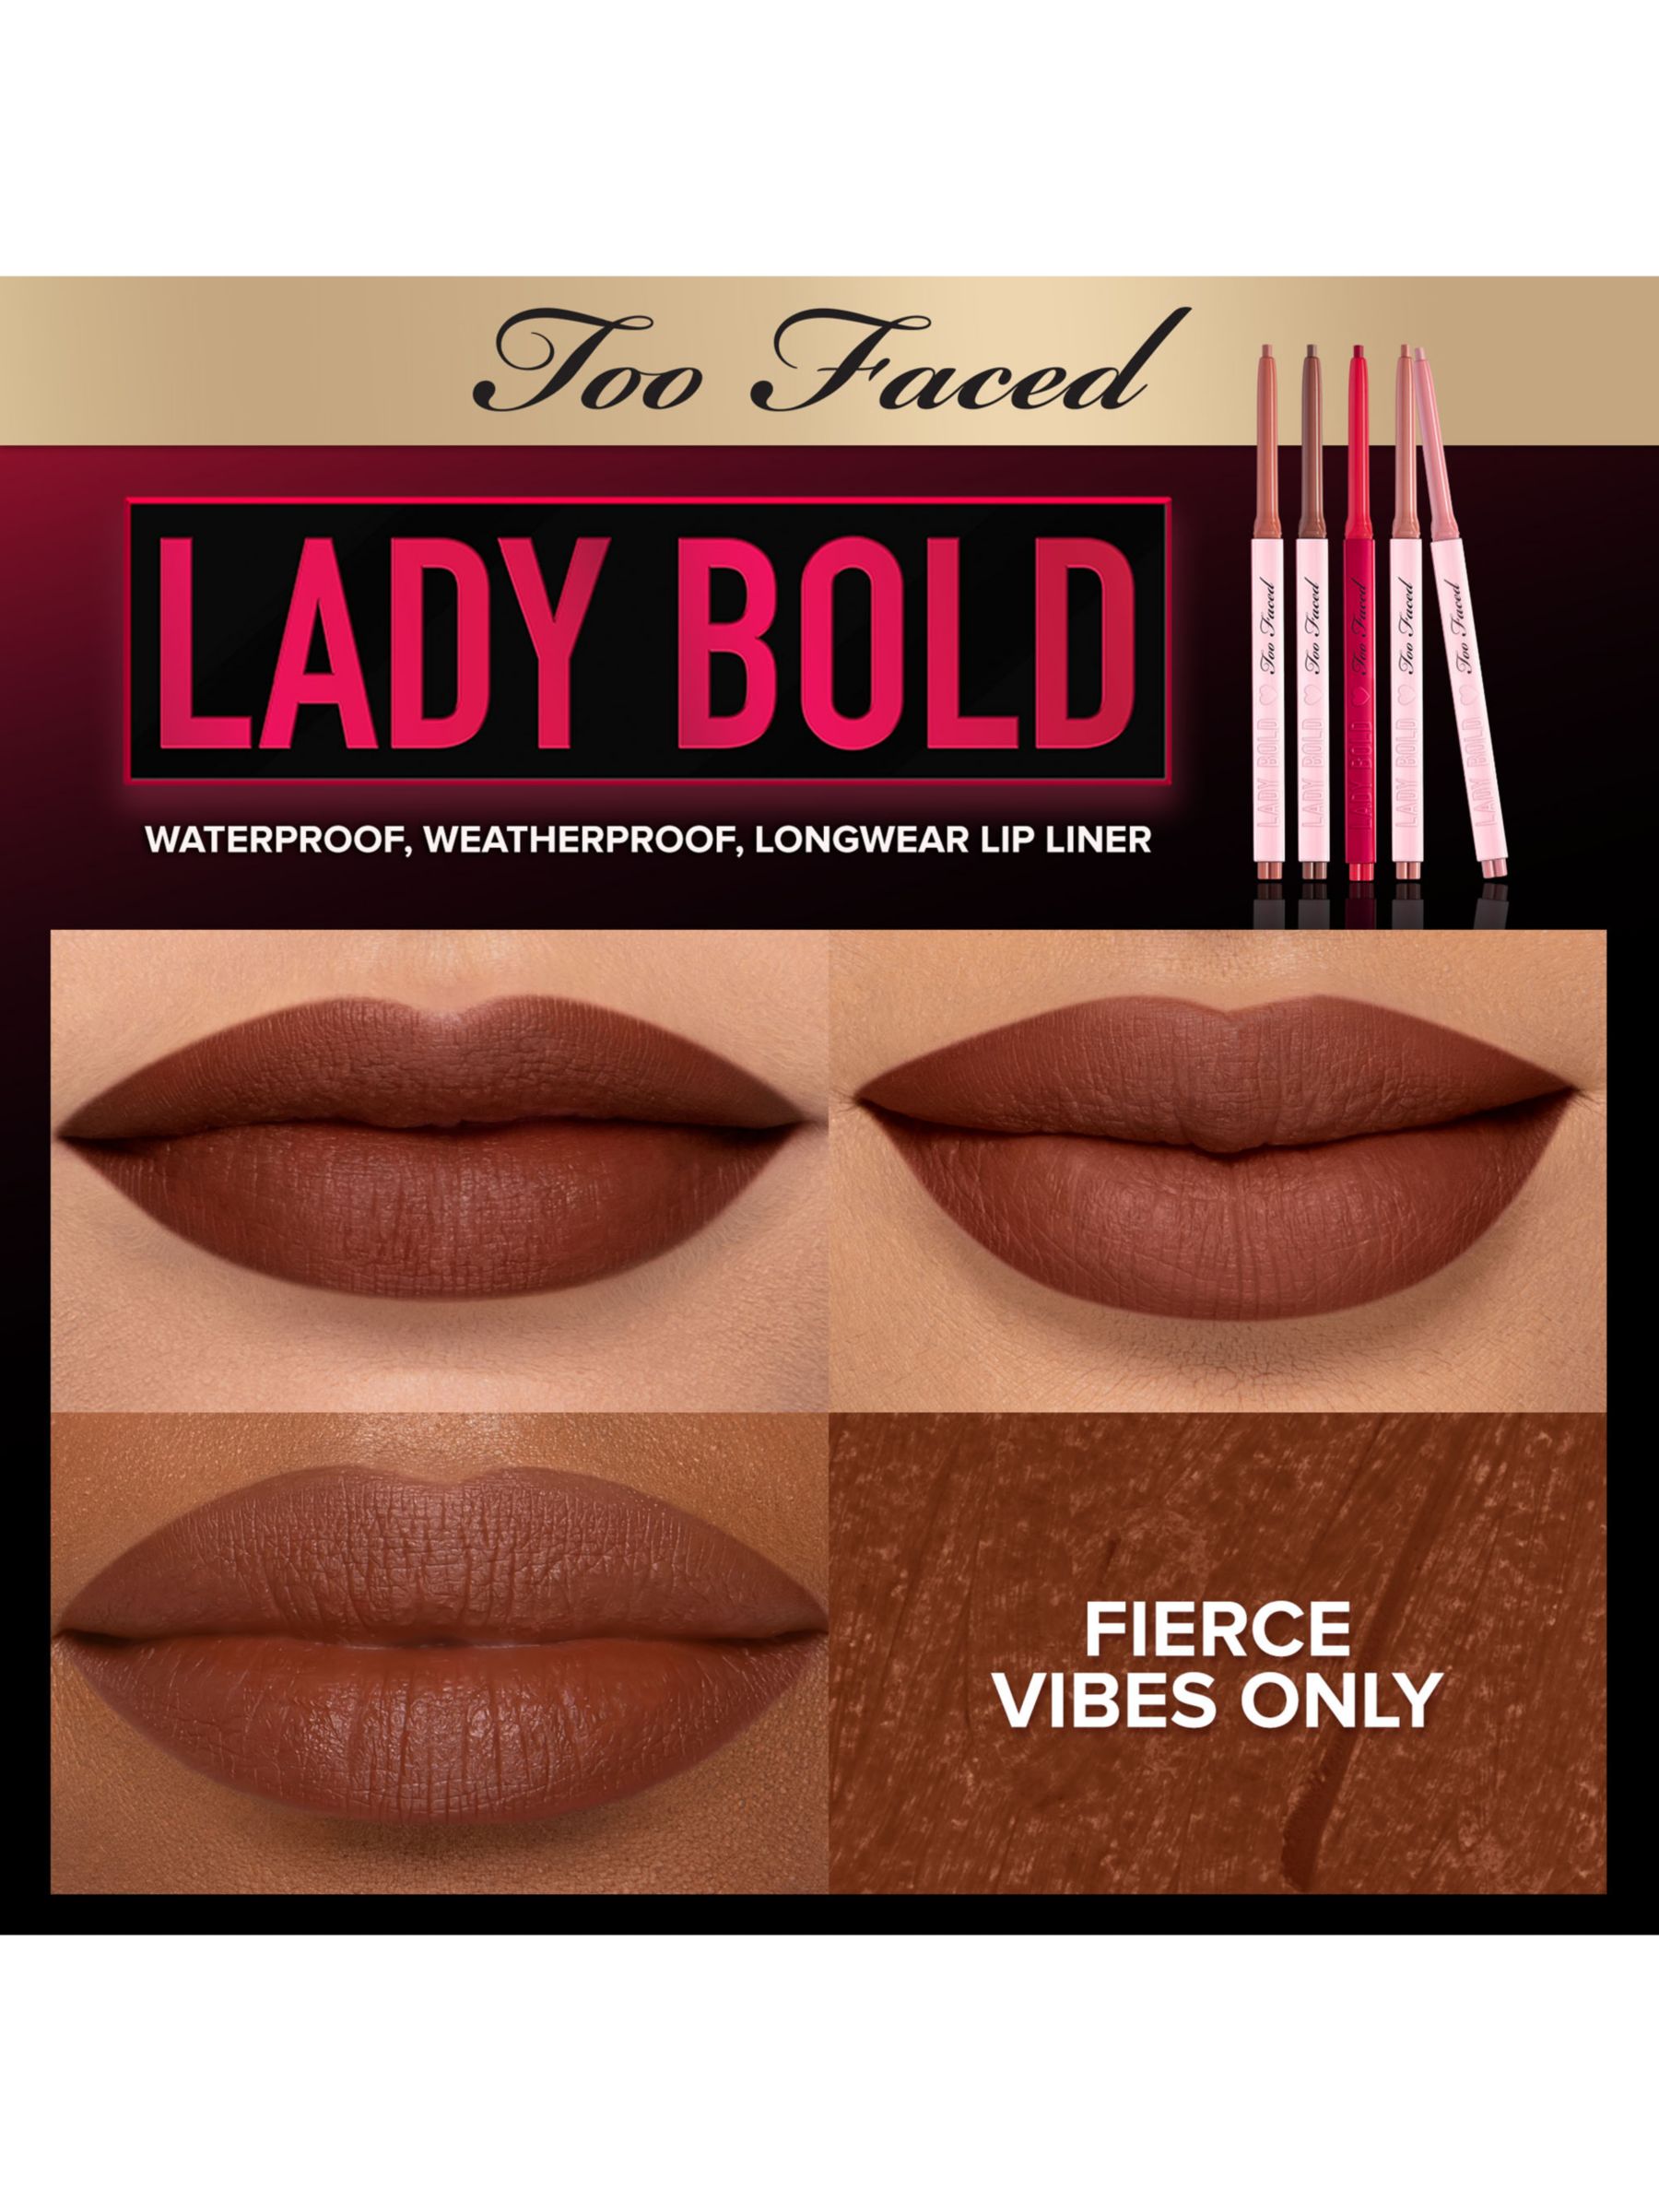 Too Faced Lady Bold Demi-Matte Long-Wear Lip Liner, Fierce Vibes Only 3